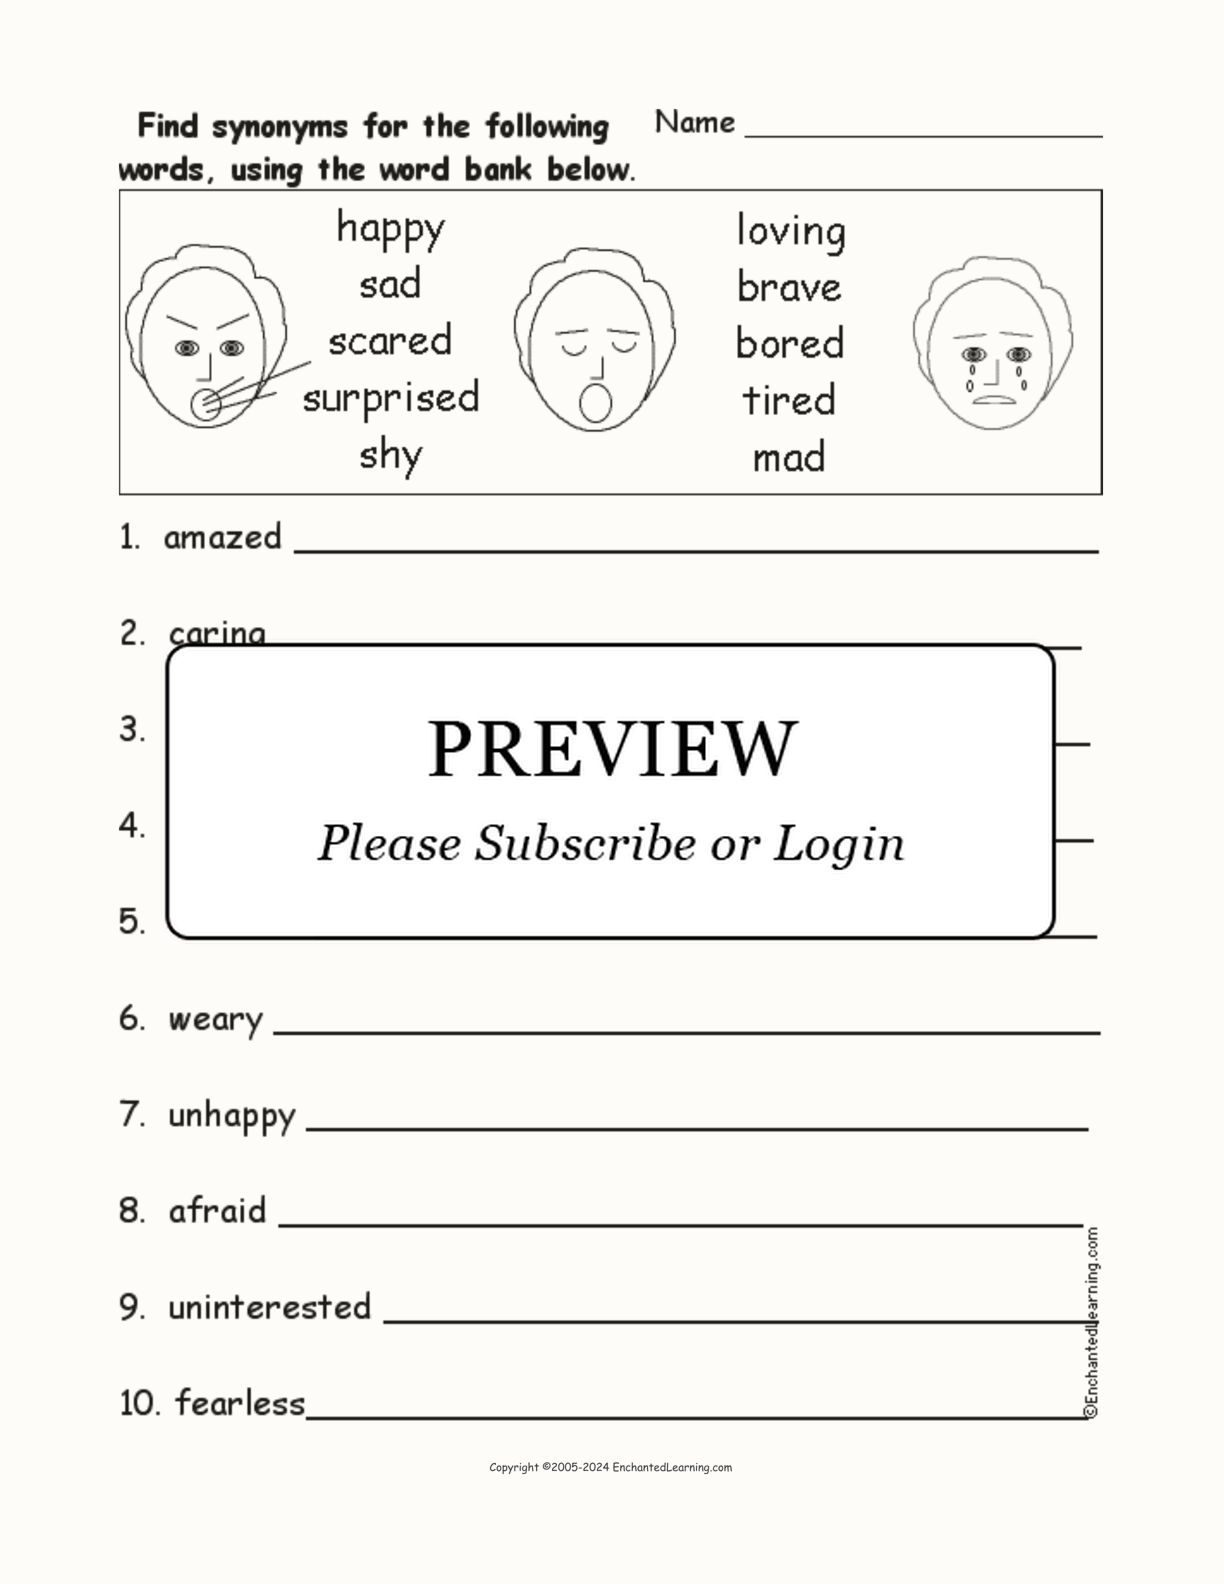 Emotion Synonyms interactive worksheet page 1